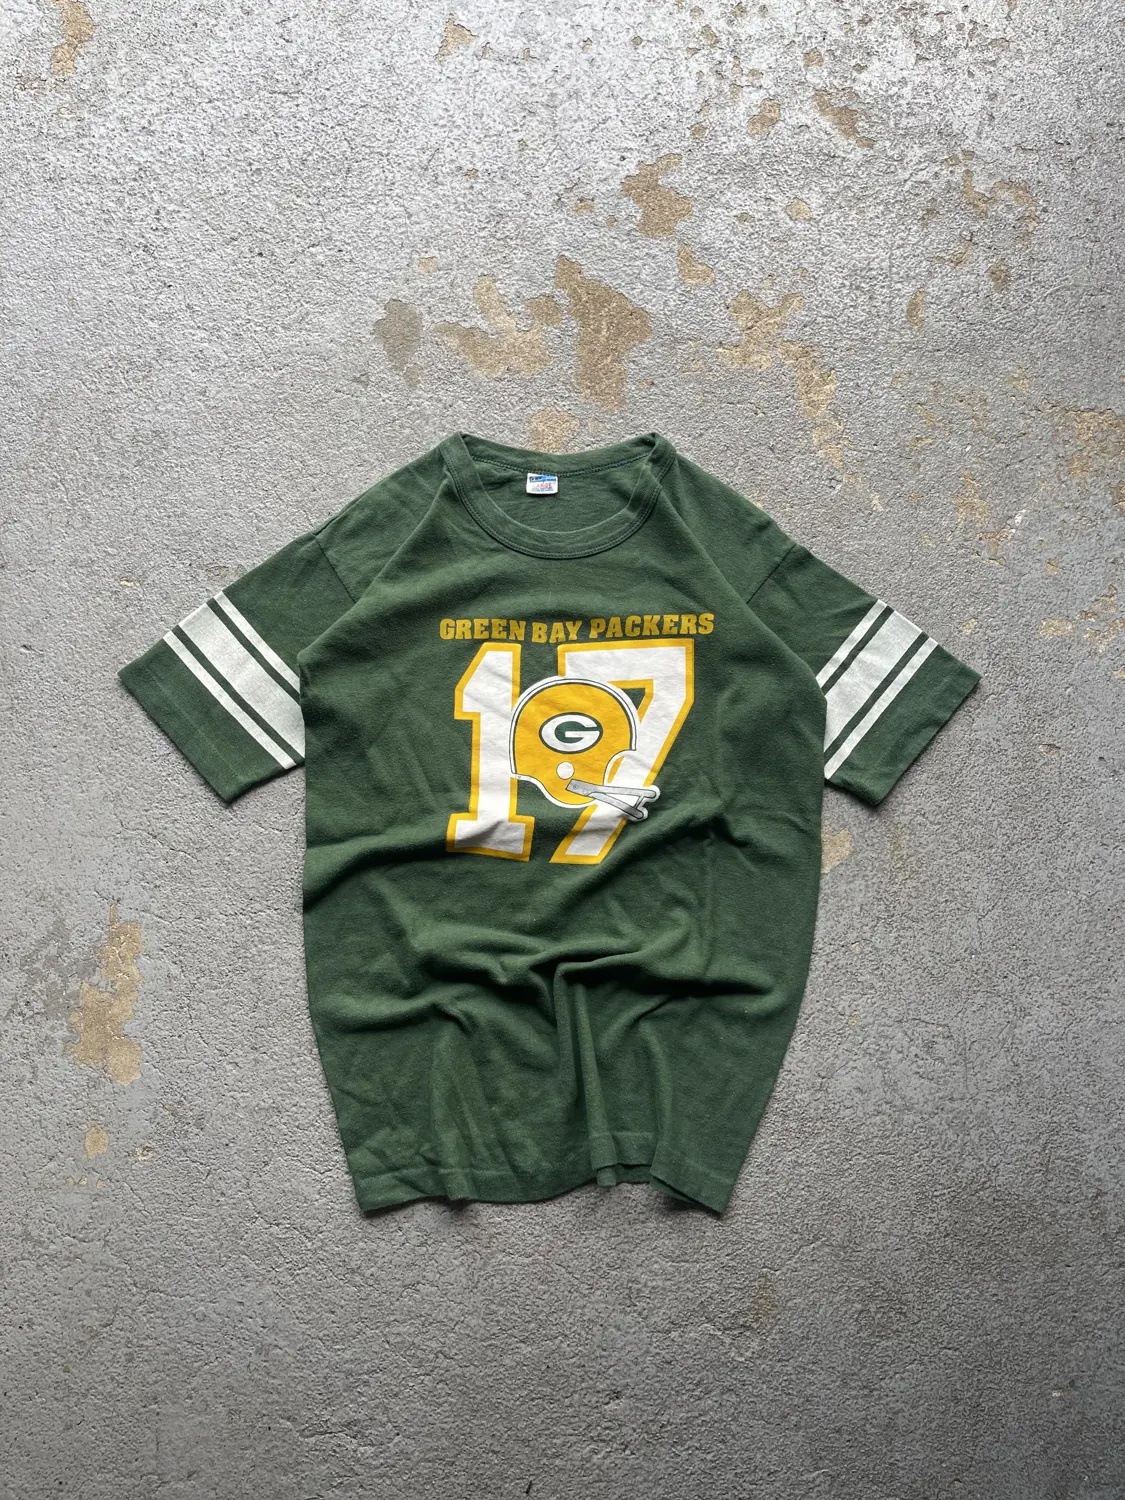 Vintage 70s Packers Shirt